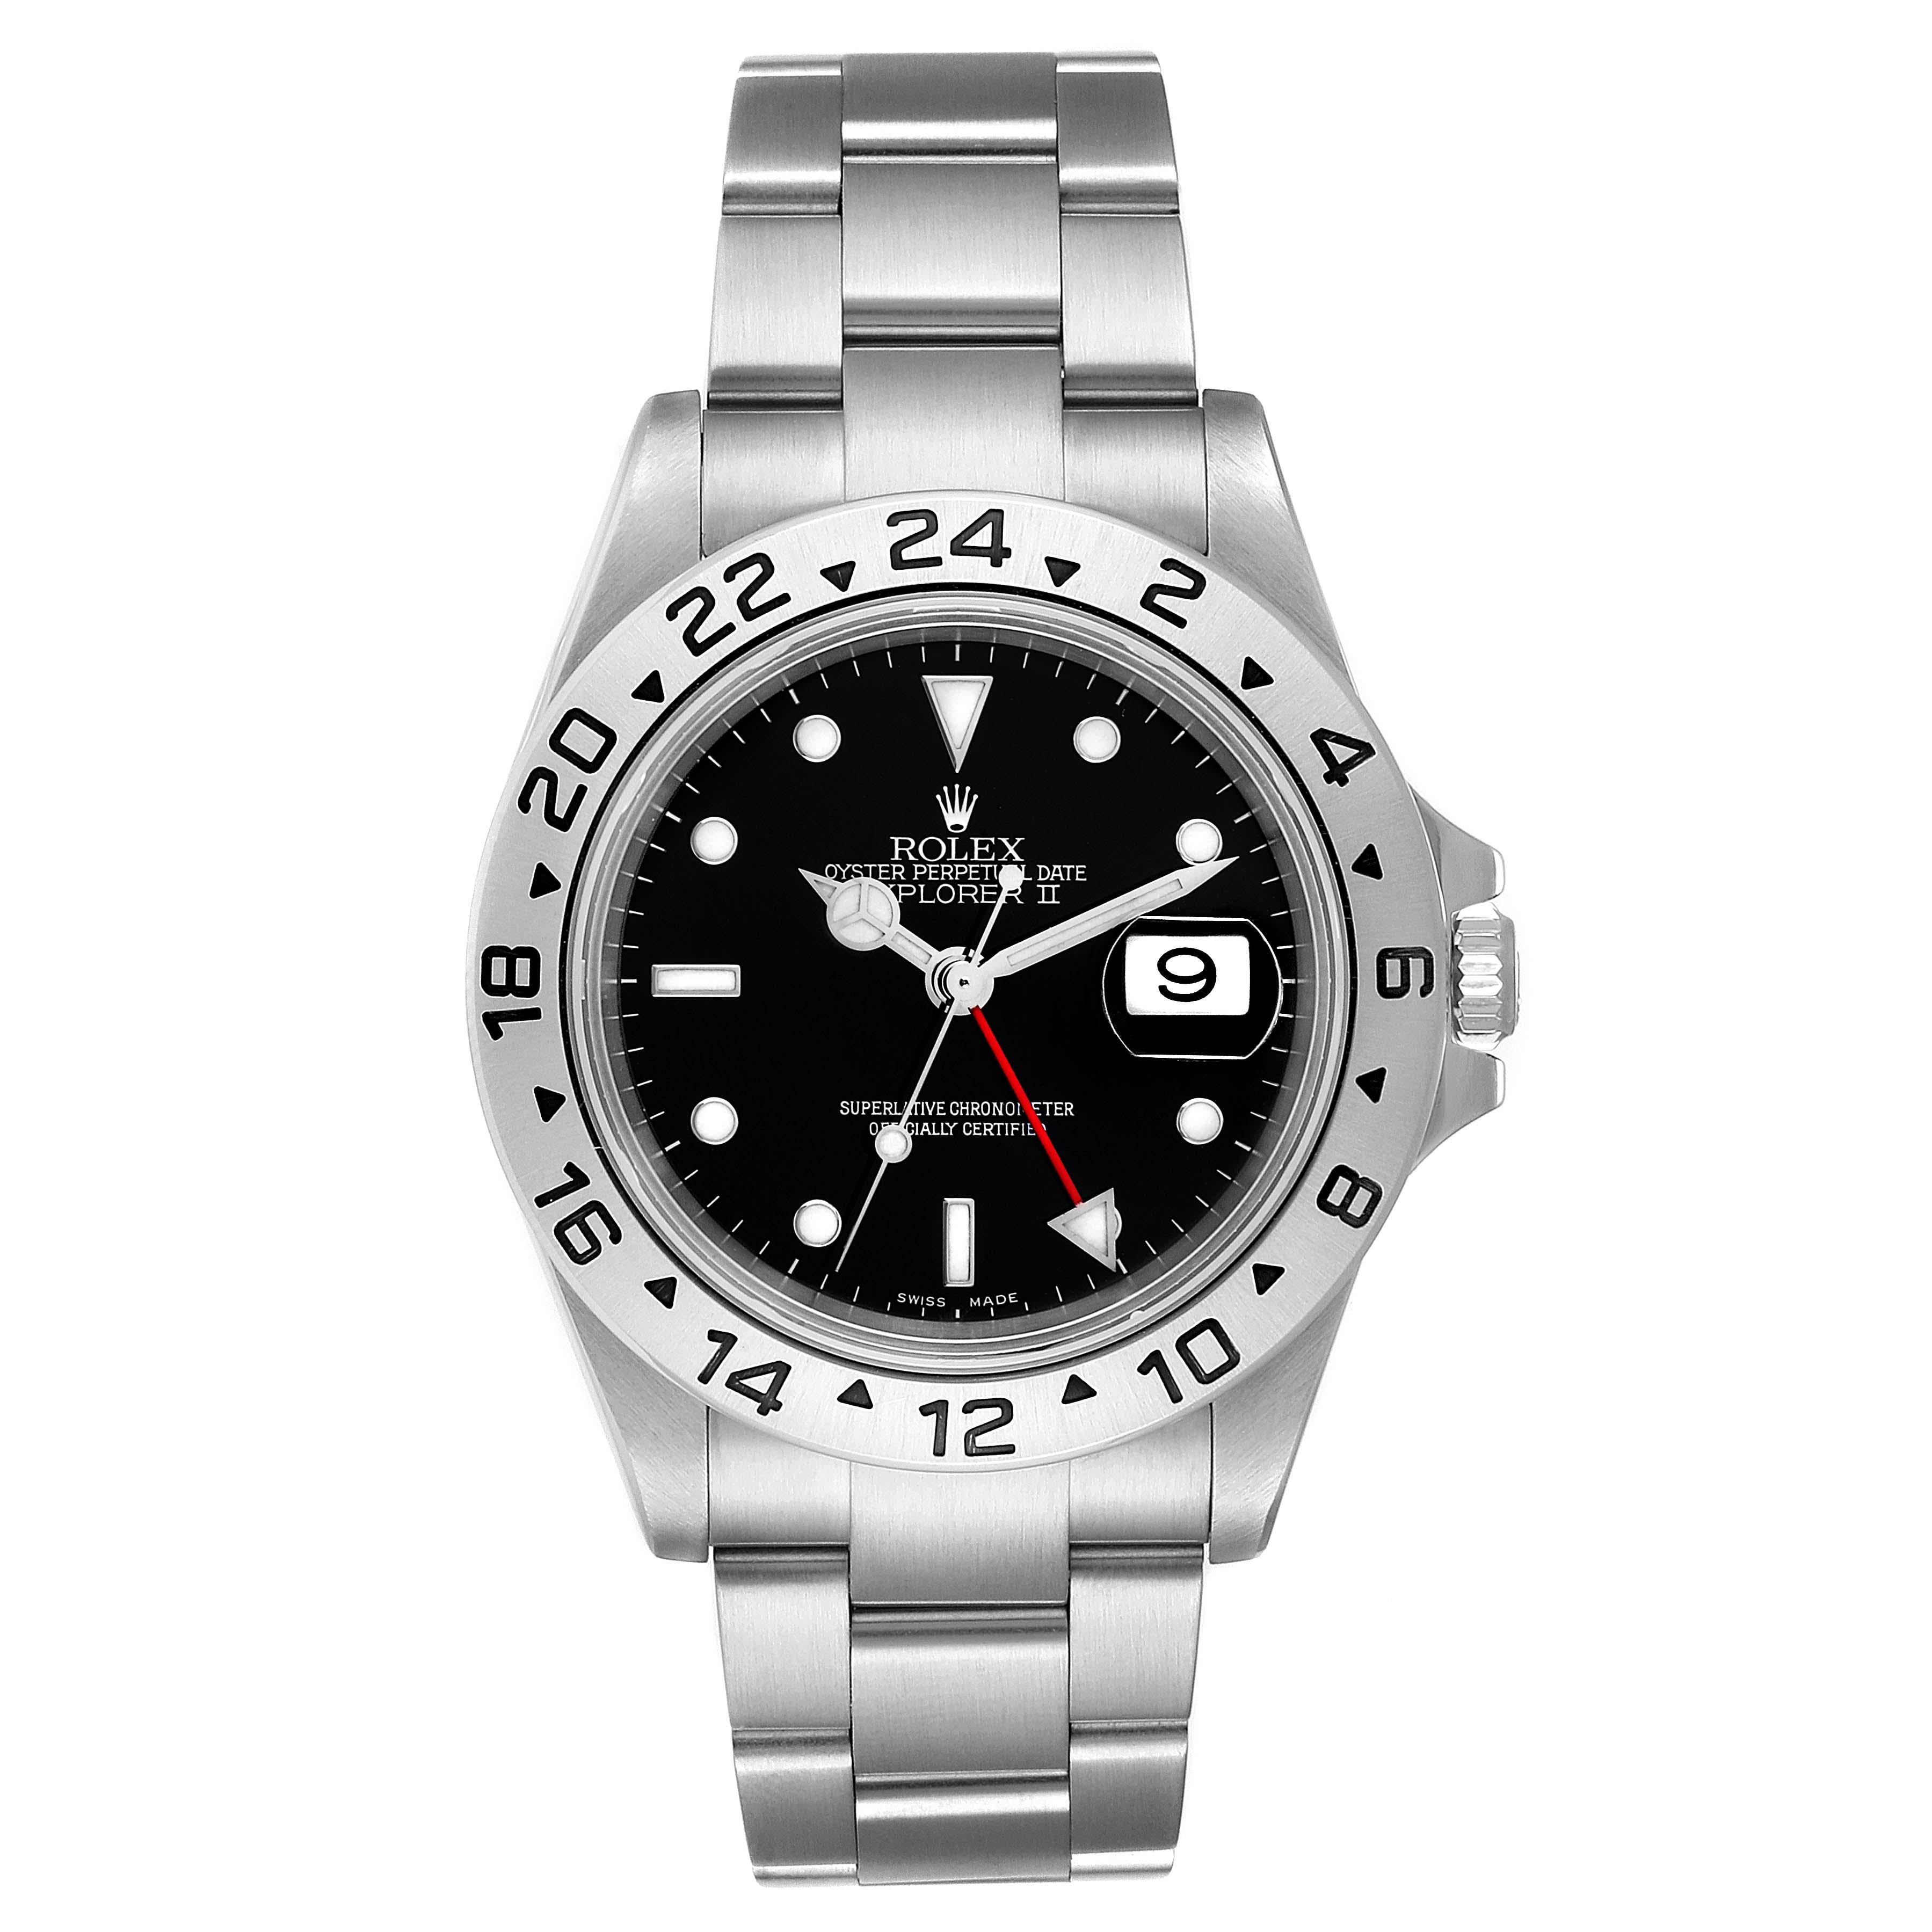 Rolex Explorer II Black Dial Automatic Steel Mens Watch 16570. Officially certified chronometer self-winding movement. Stainless steel case 40 mm in diameter. Rolex logo on a crown. Stainless steel bezel. Scratch resistant sapphire crystal with